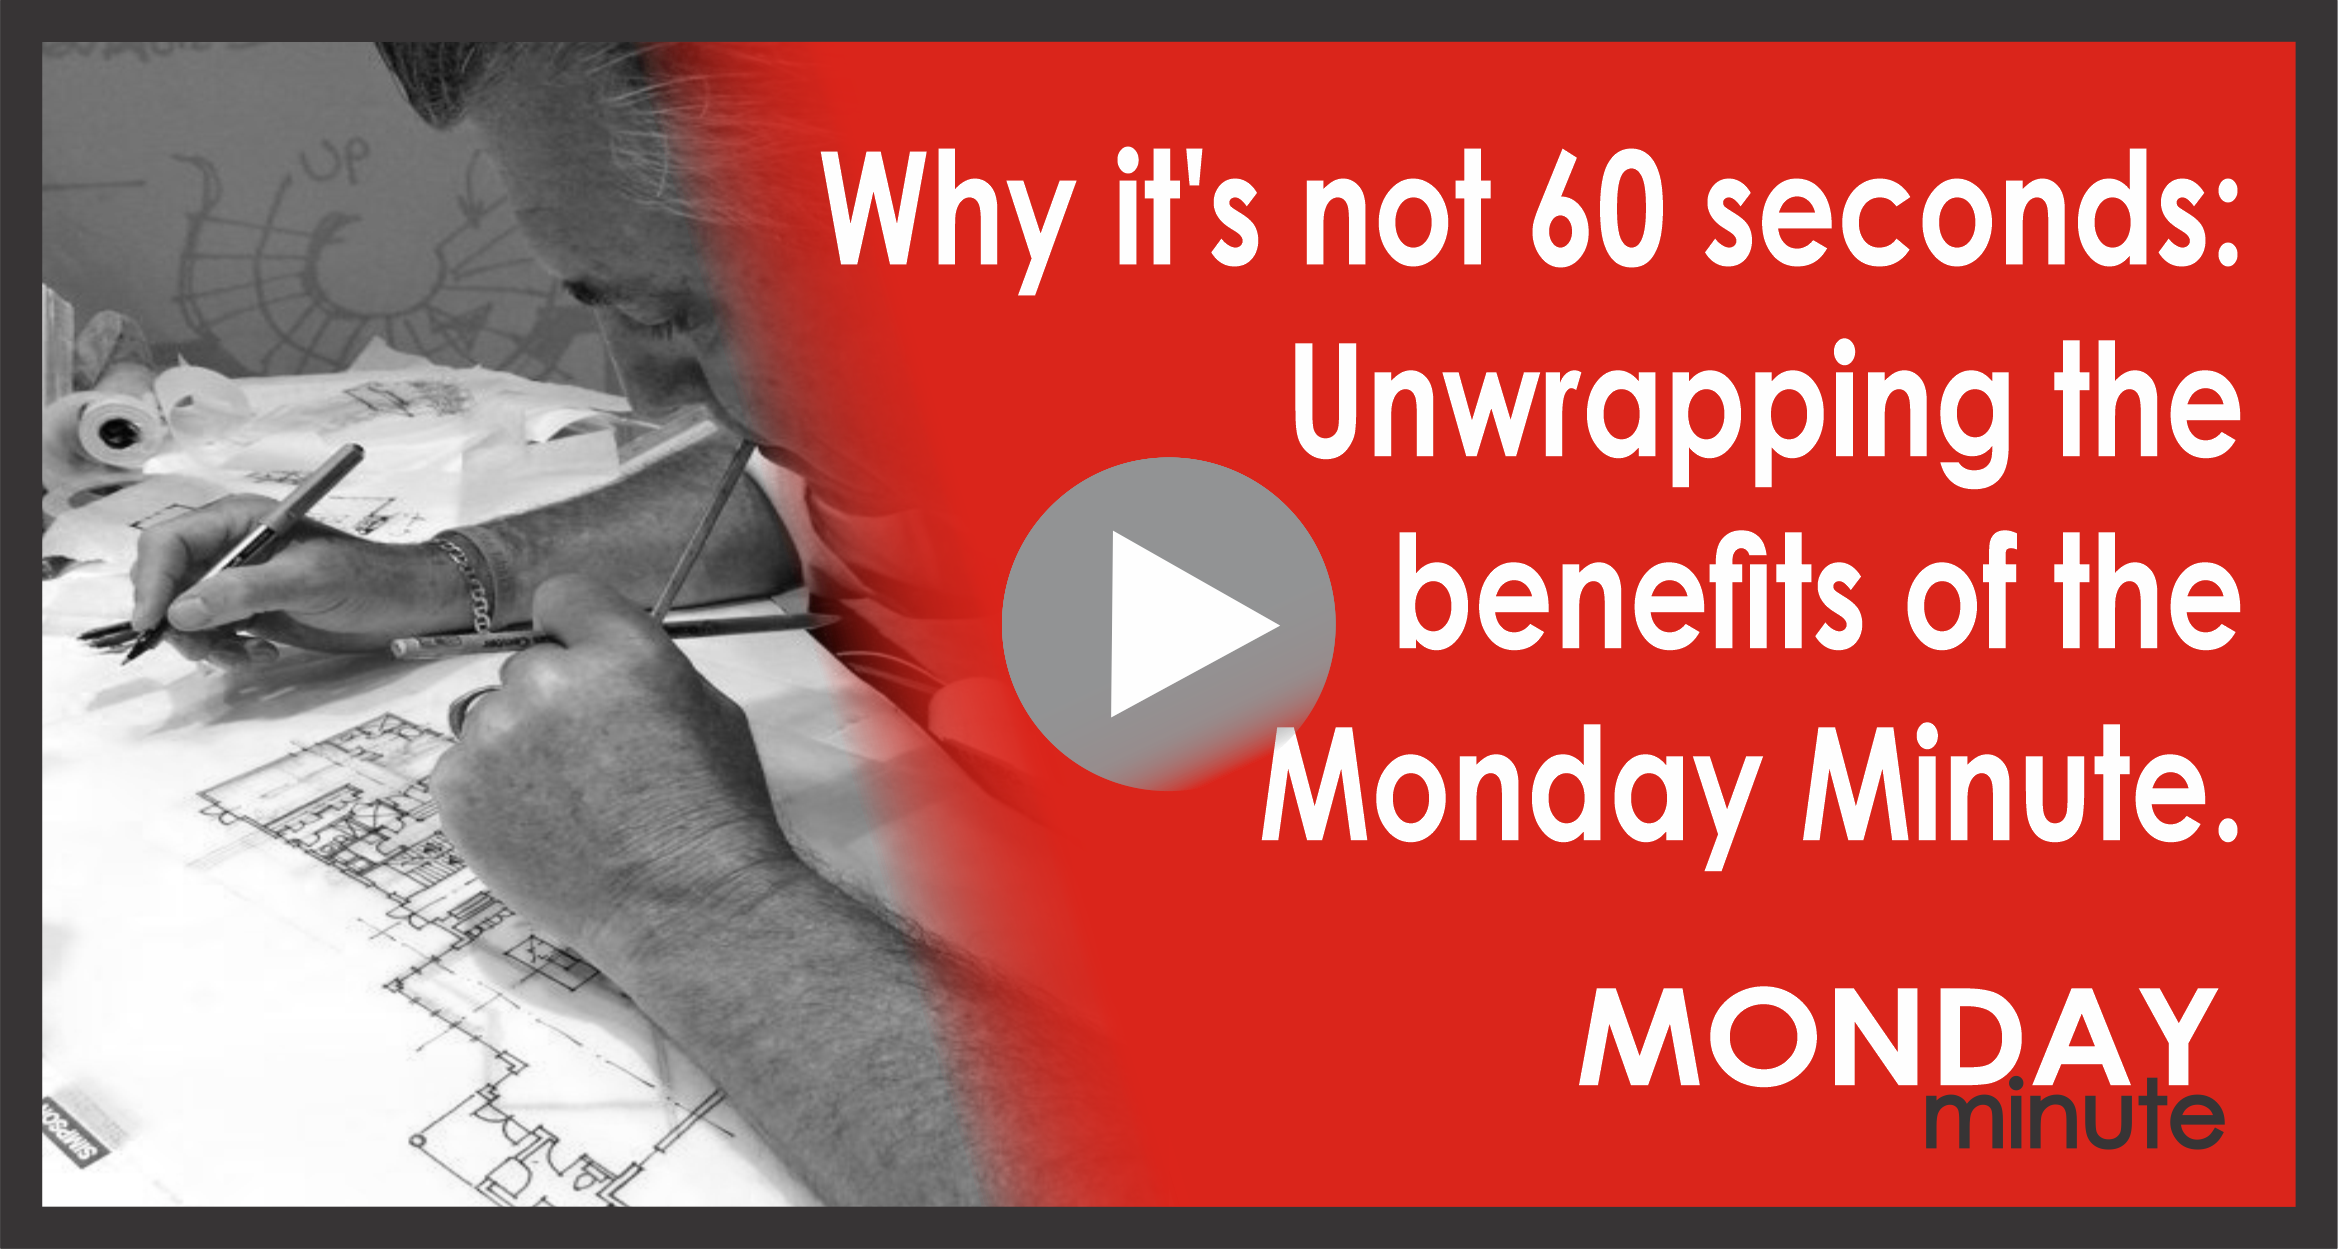 Why it's not 60 seconds: Unwrapping the benefits of the Monday Minute.